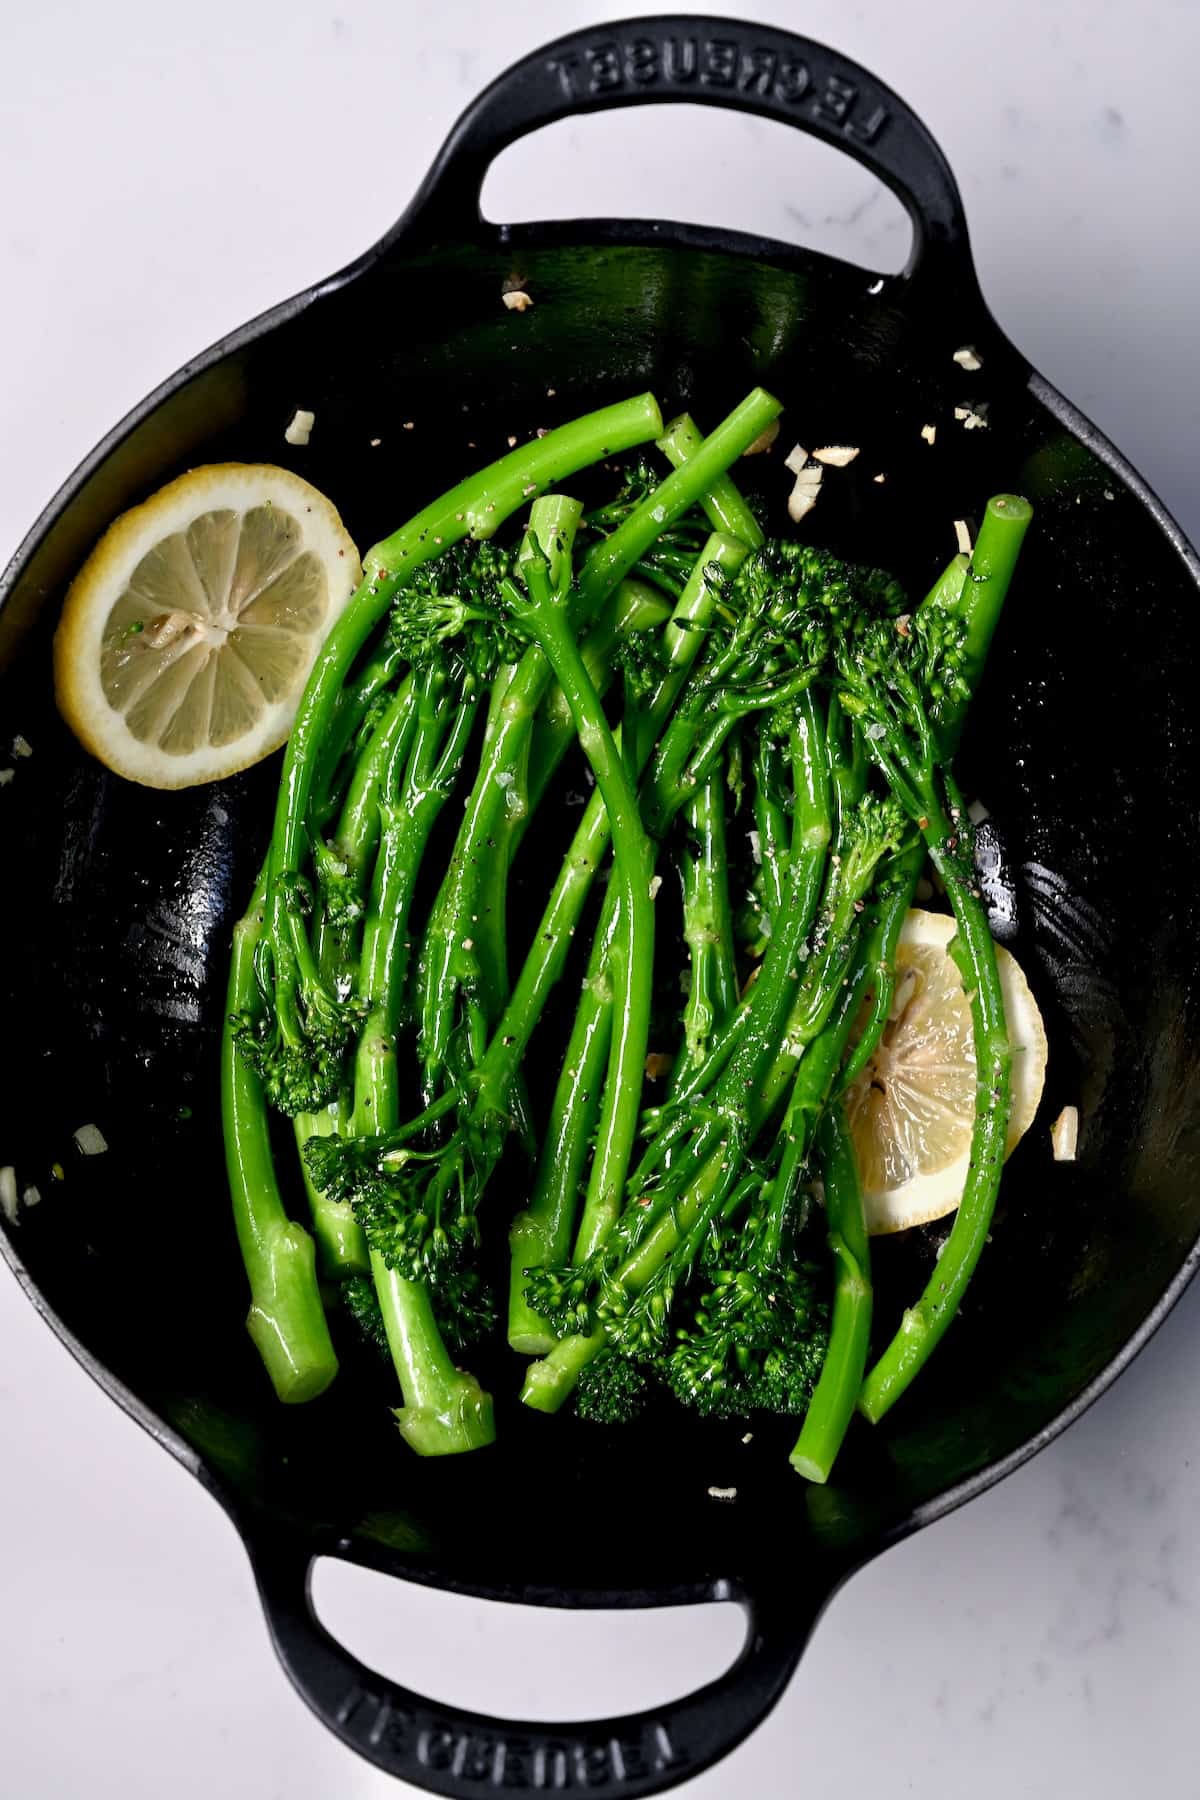 Sauteed broccolini in a pan with lemon slices